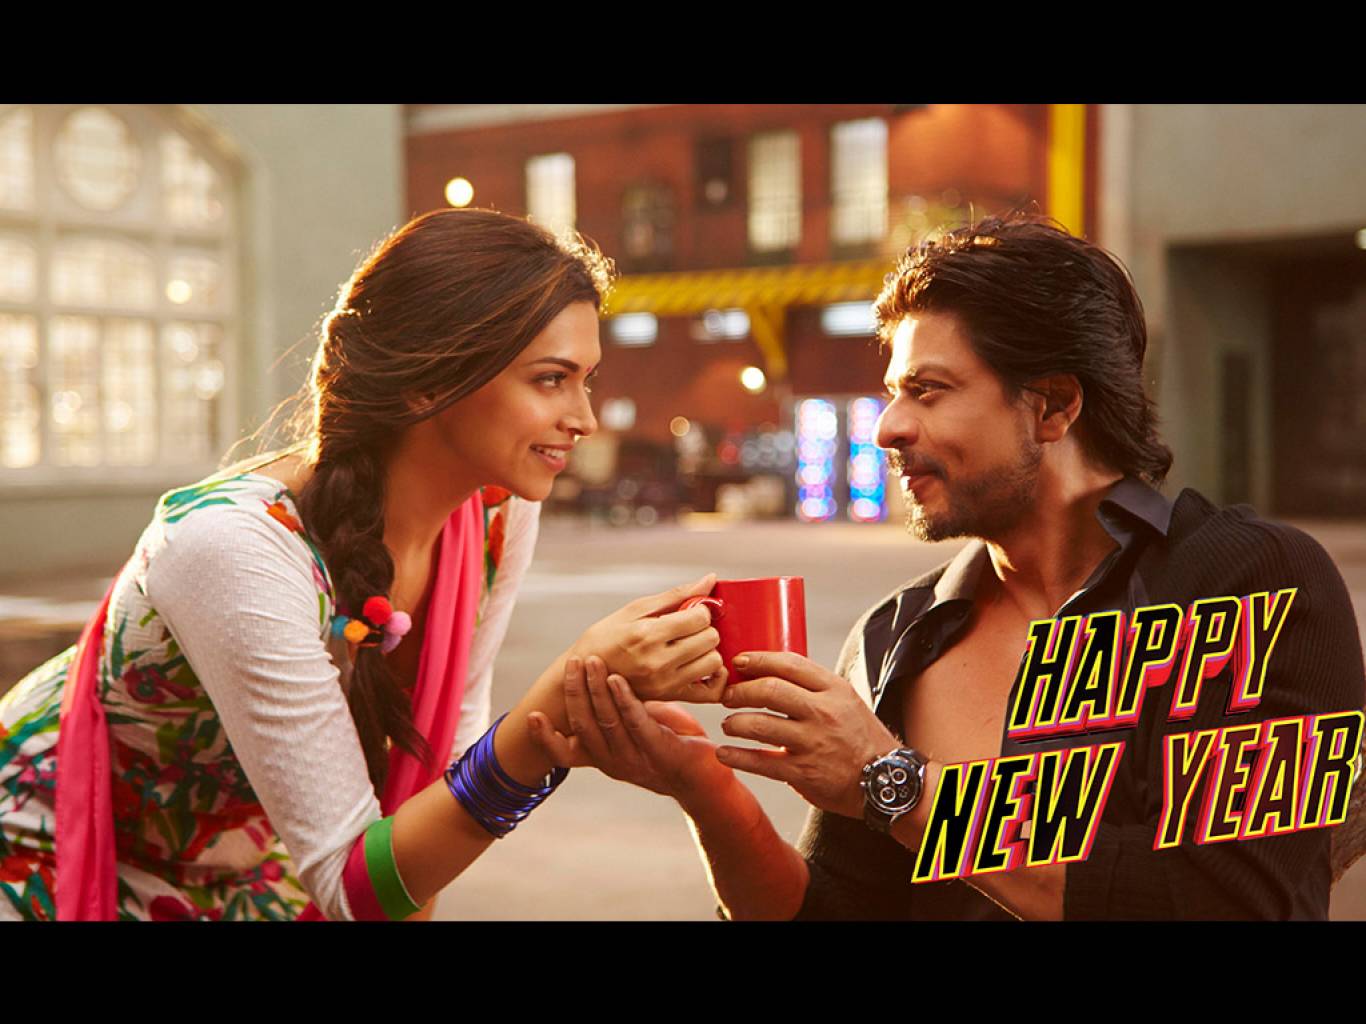 Happy New Year - Happy New Year Movie Images Download , HD Wallpaper & Backgrounds